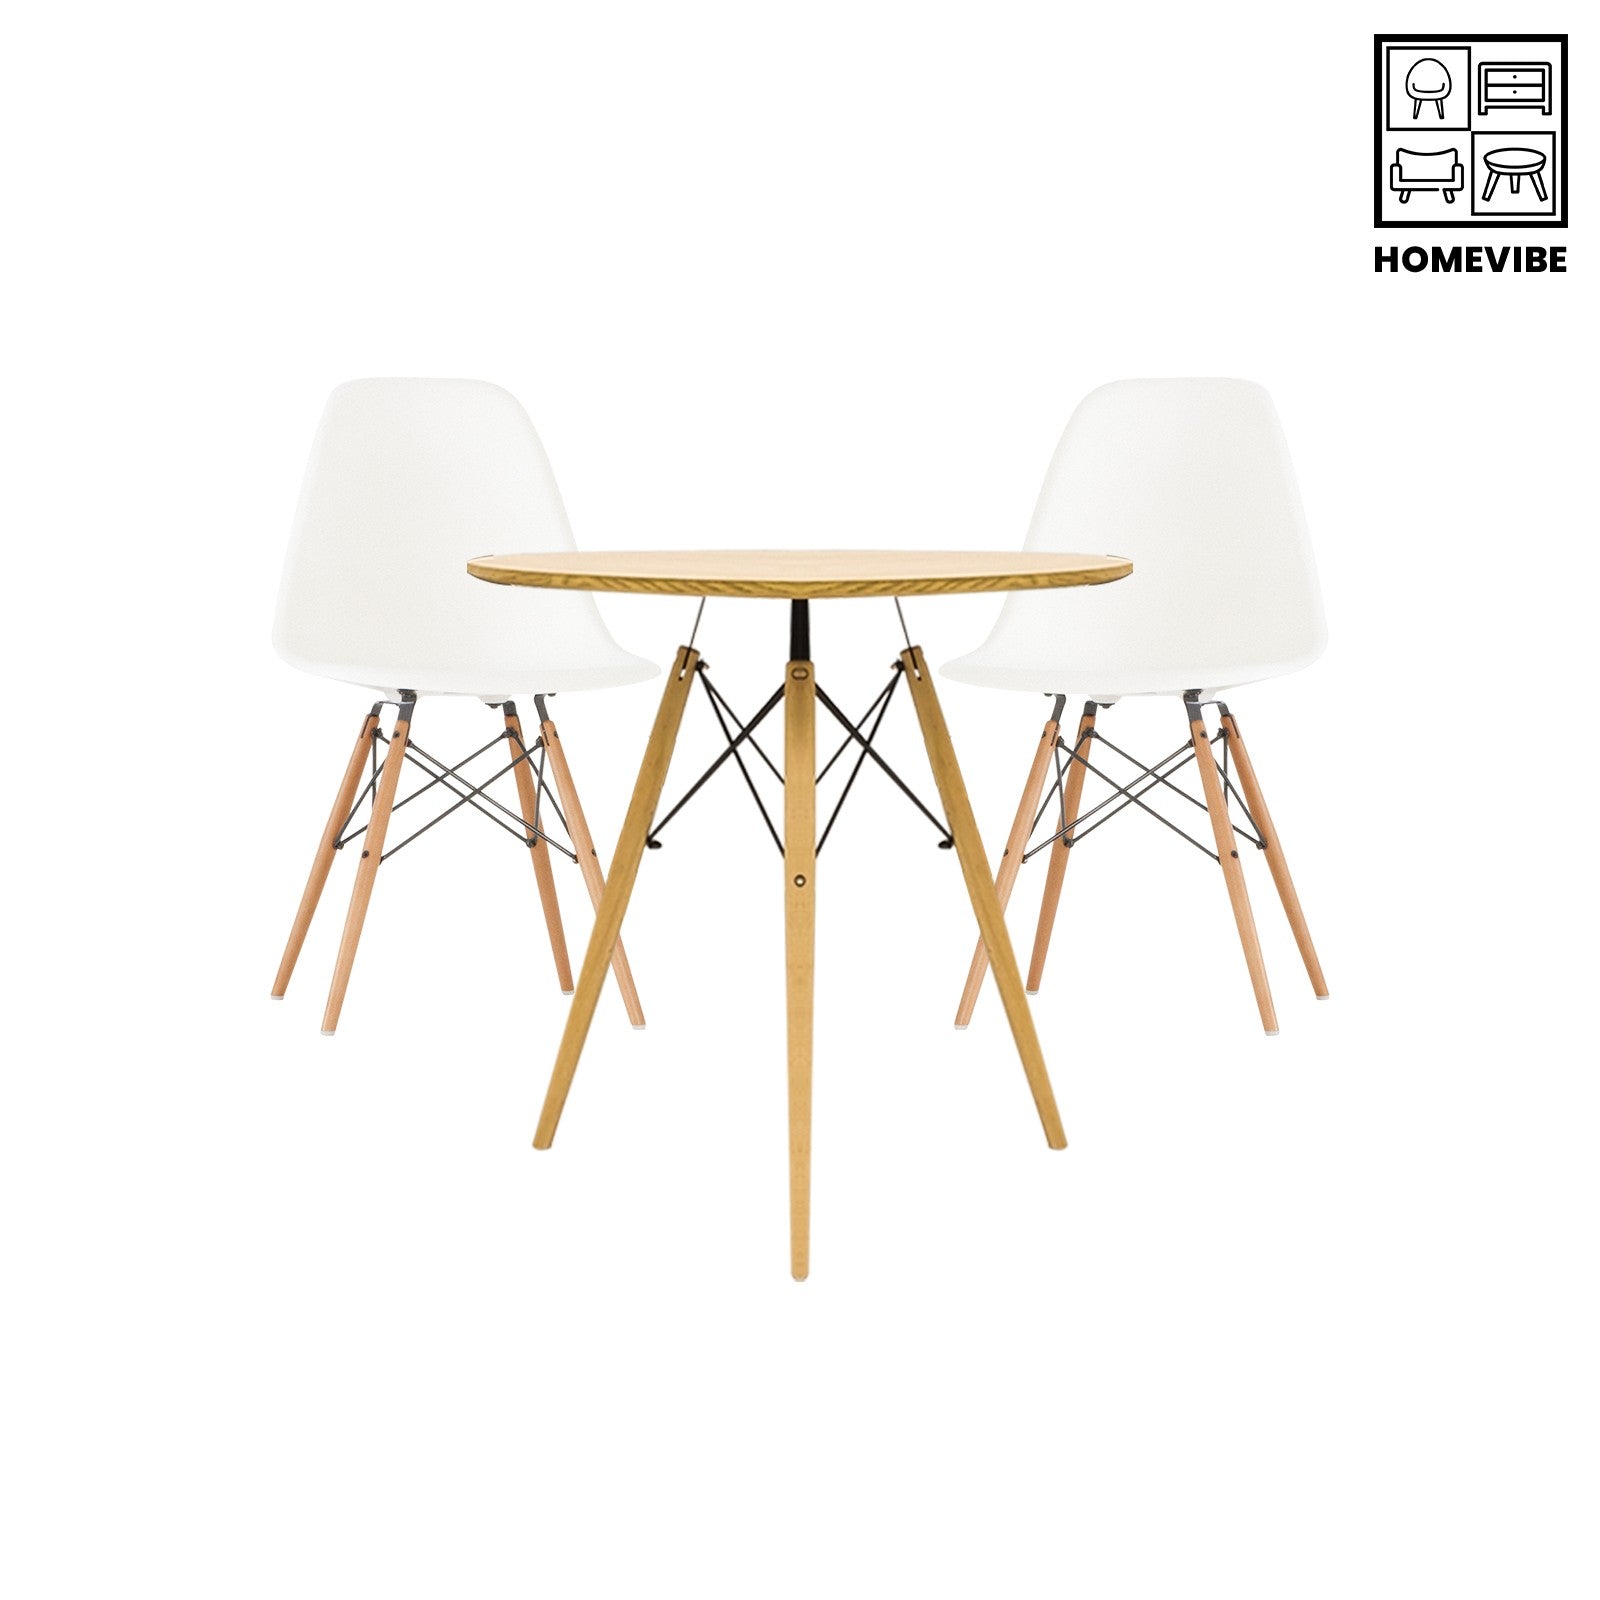 HV Elio Round Table + 2 Eames Chair Set | HomeVibe PH | Buy Online Furniture and Home Furnishings